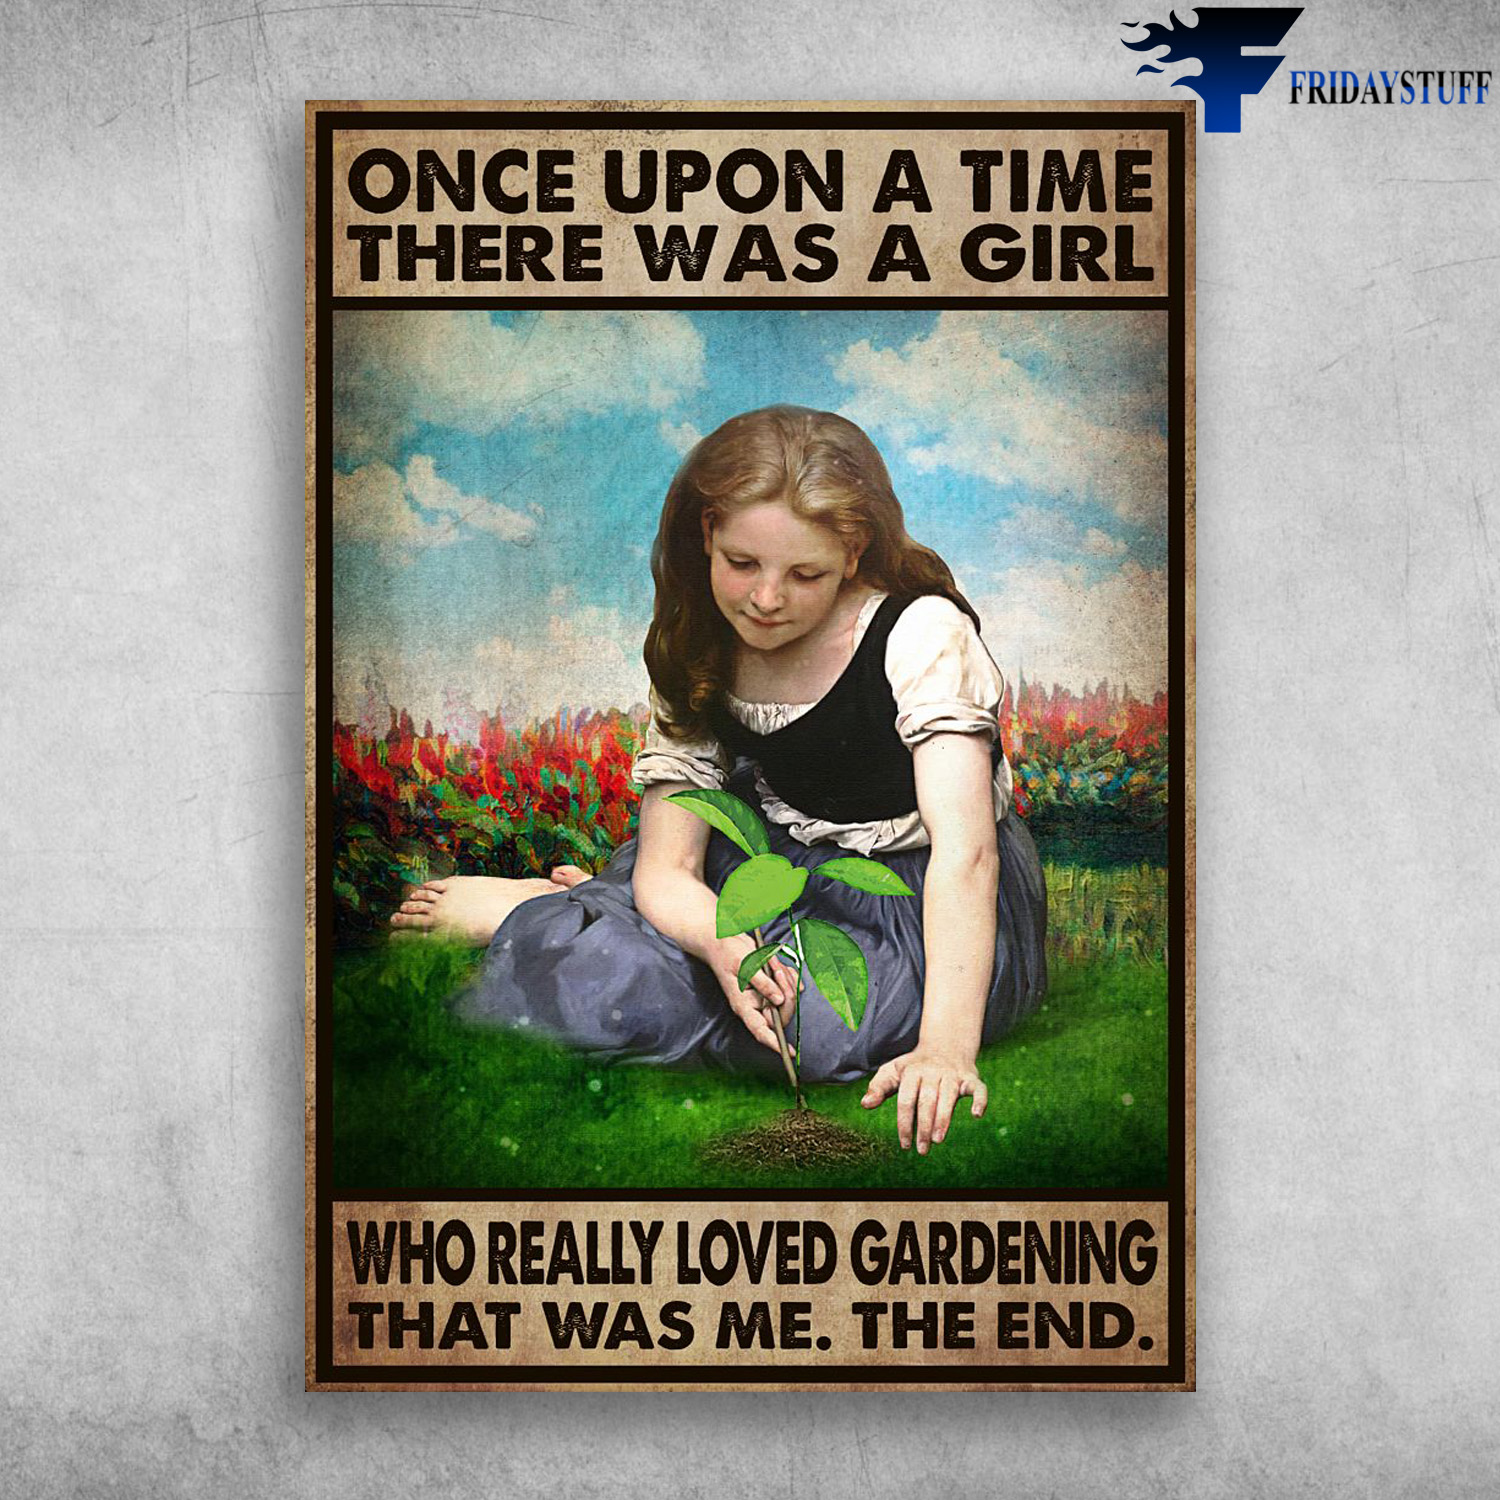 Girl Loves Gardening - Once Upon A Time, There Was A Girl, Who Really Loved Gardening, That Was Me, The End